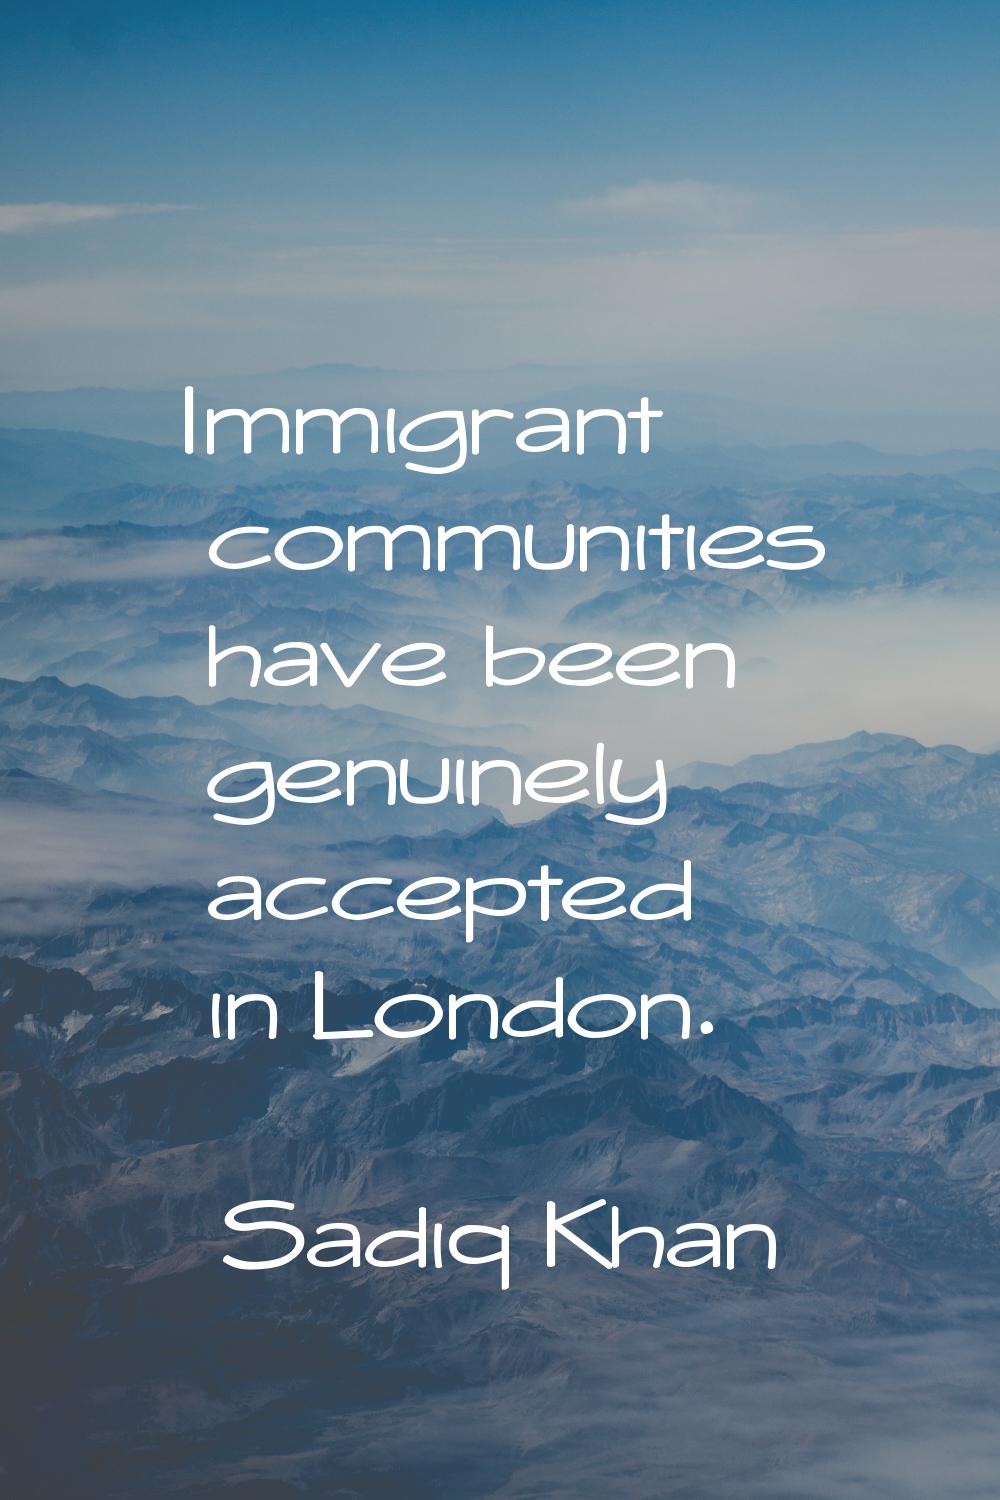 Immigrant communities have been genuinely accepted in London.